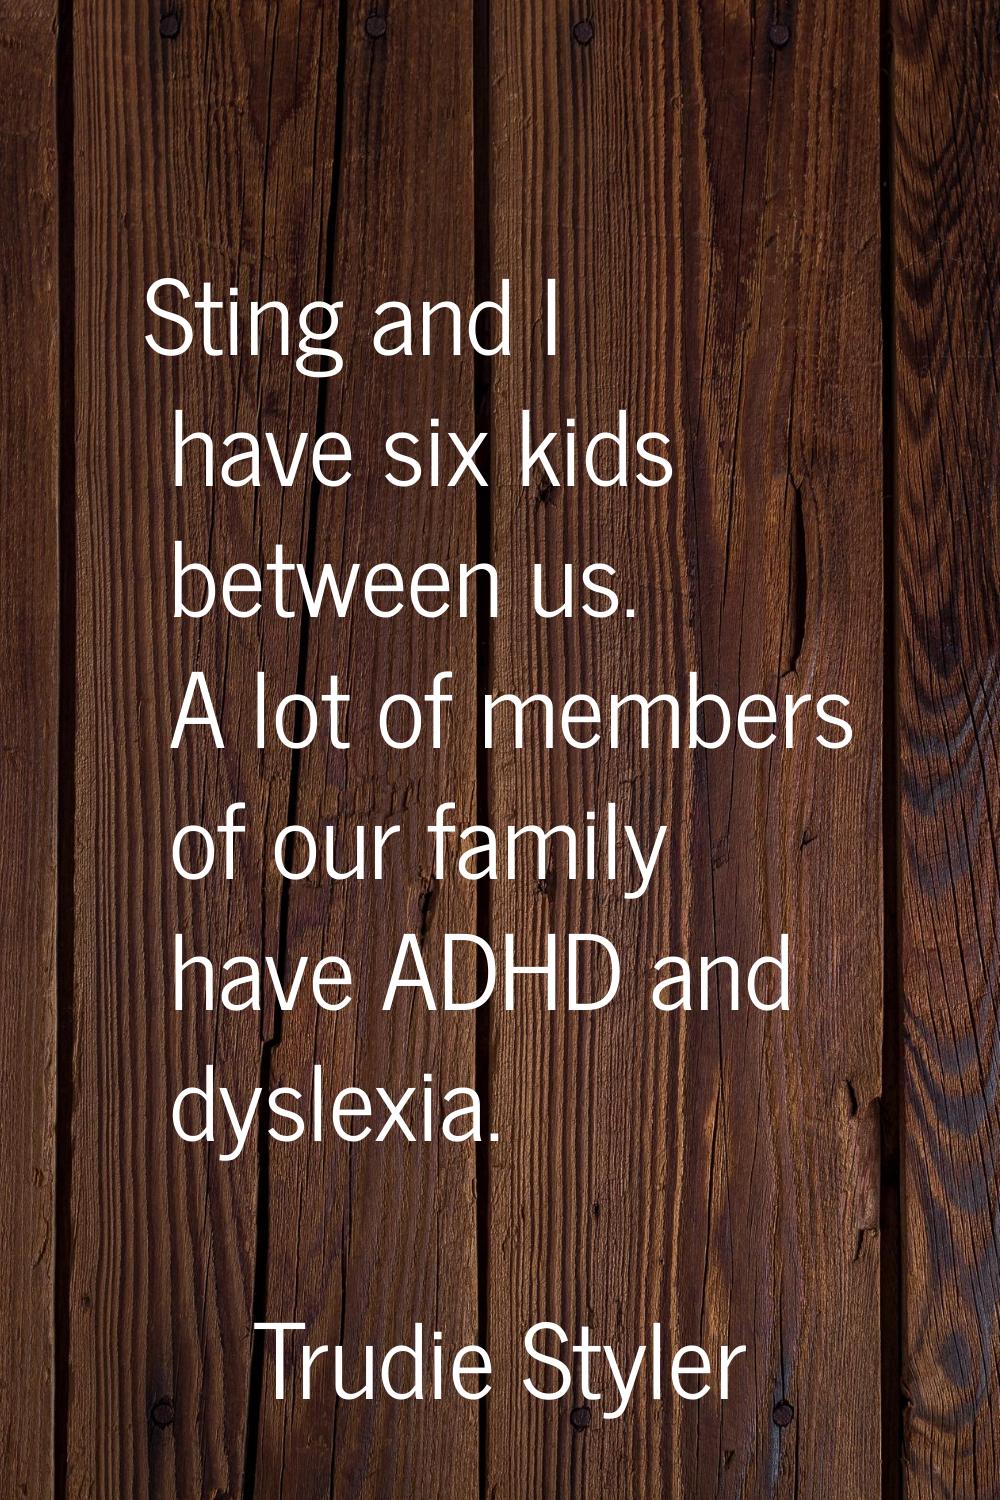 Sting and I have six kids between us. A lot of members of our family have ADHD and dyslexia.